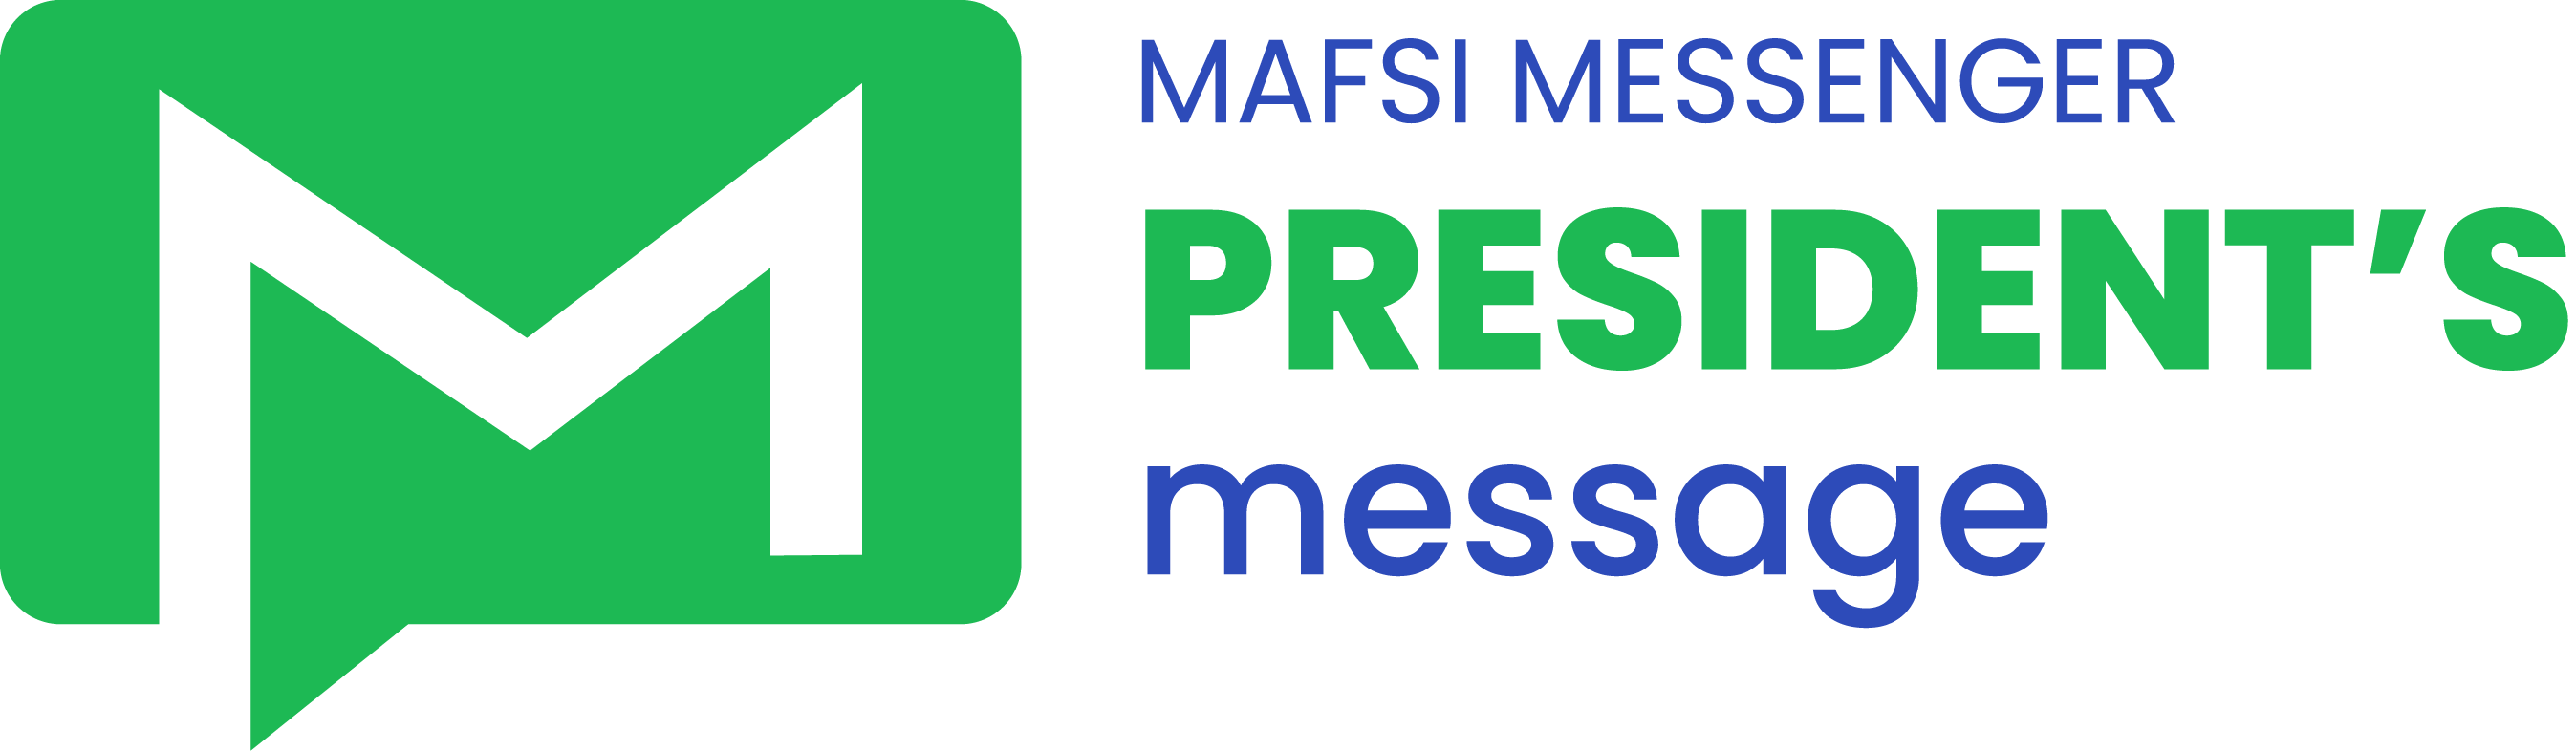 Mafsi Messenger Blog Banners v4 committee revised Tight to Artboards_MAFSI messenger Presidents Message